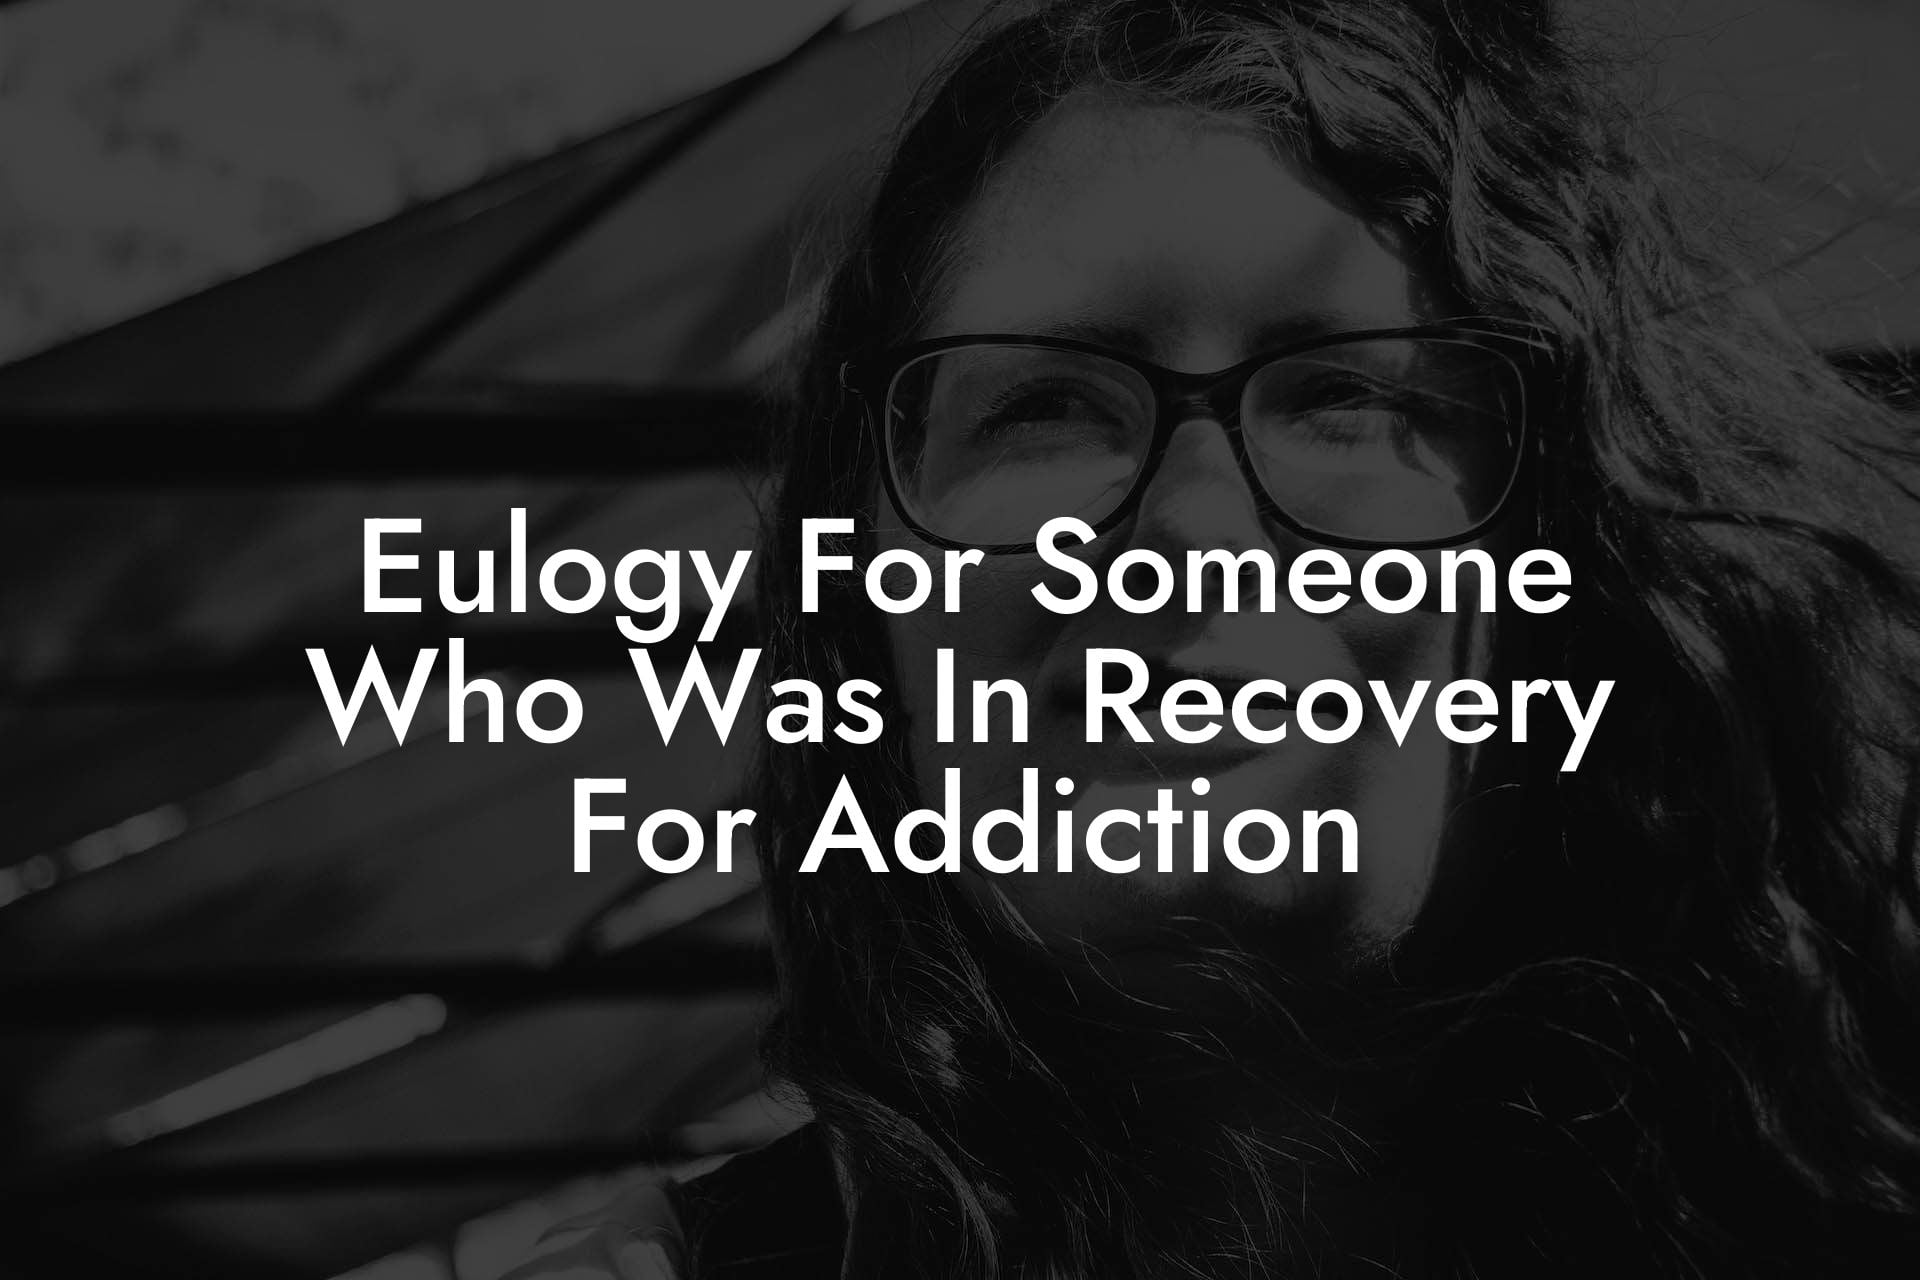 Eulogy For Someone Who Was In Recovery For Addiction